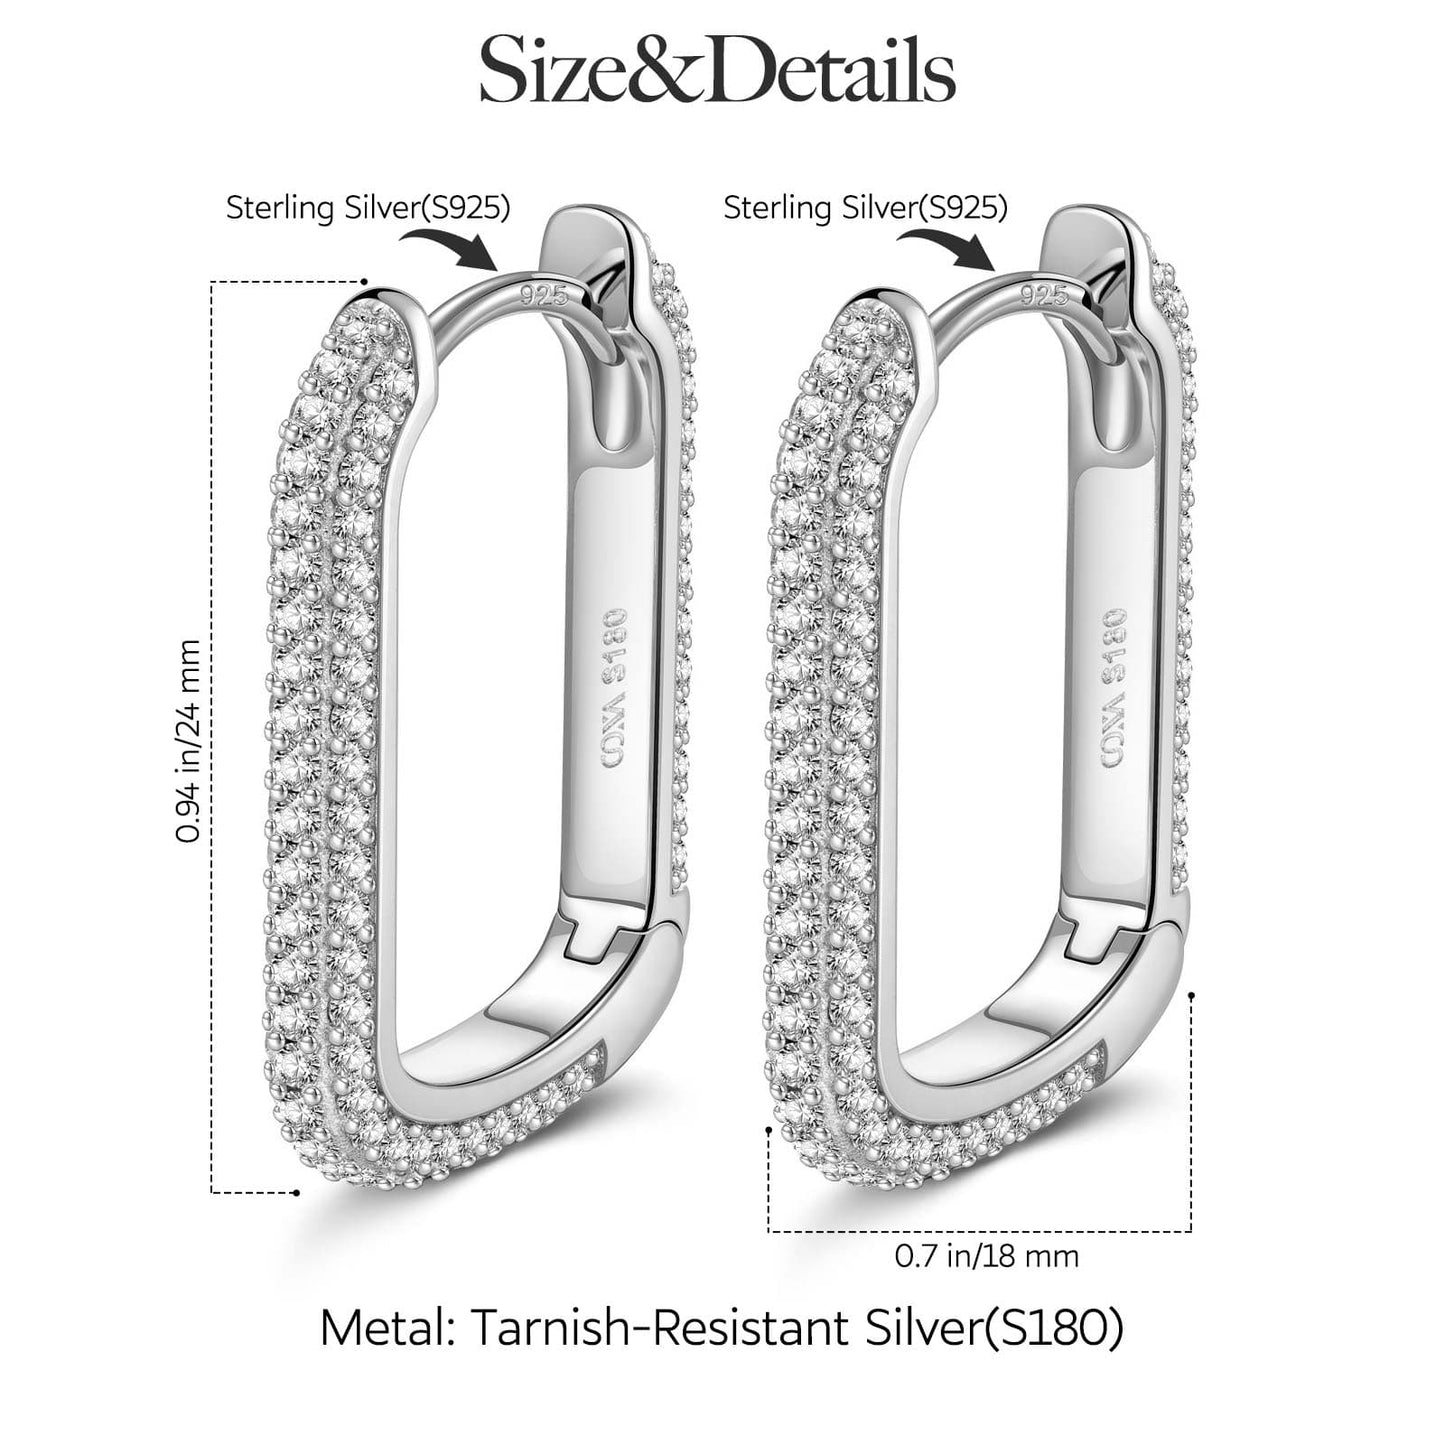 Shimmering Beauty Tarnish-resistant Silver Classic Earrings with Sterling Silver Ear Post In White Gold Plated